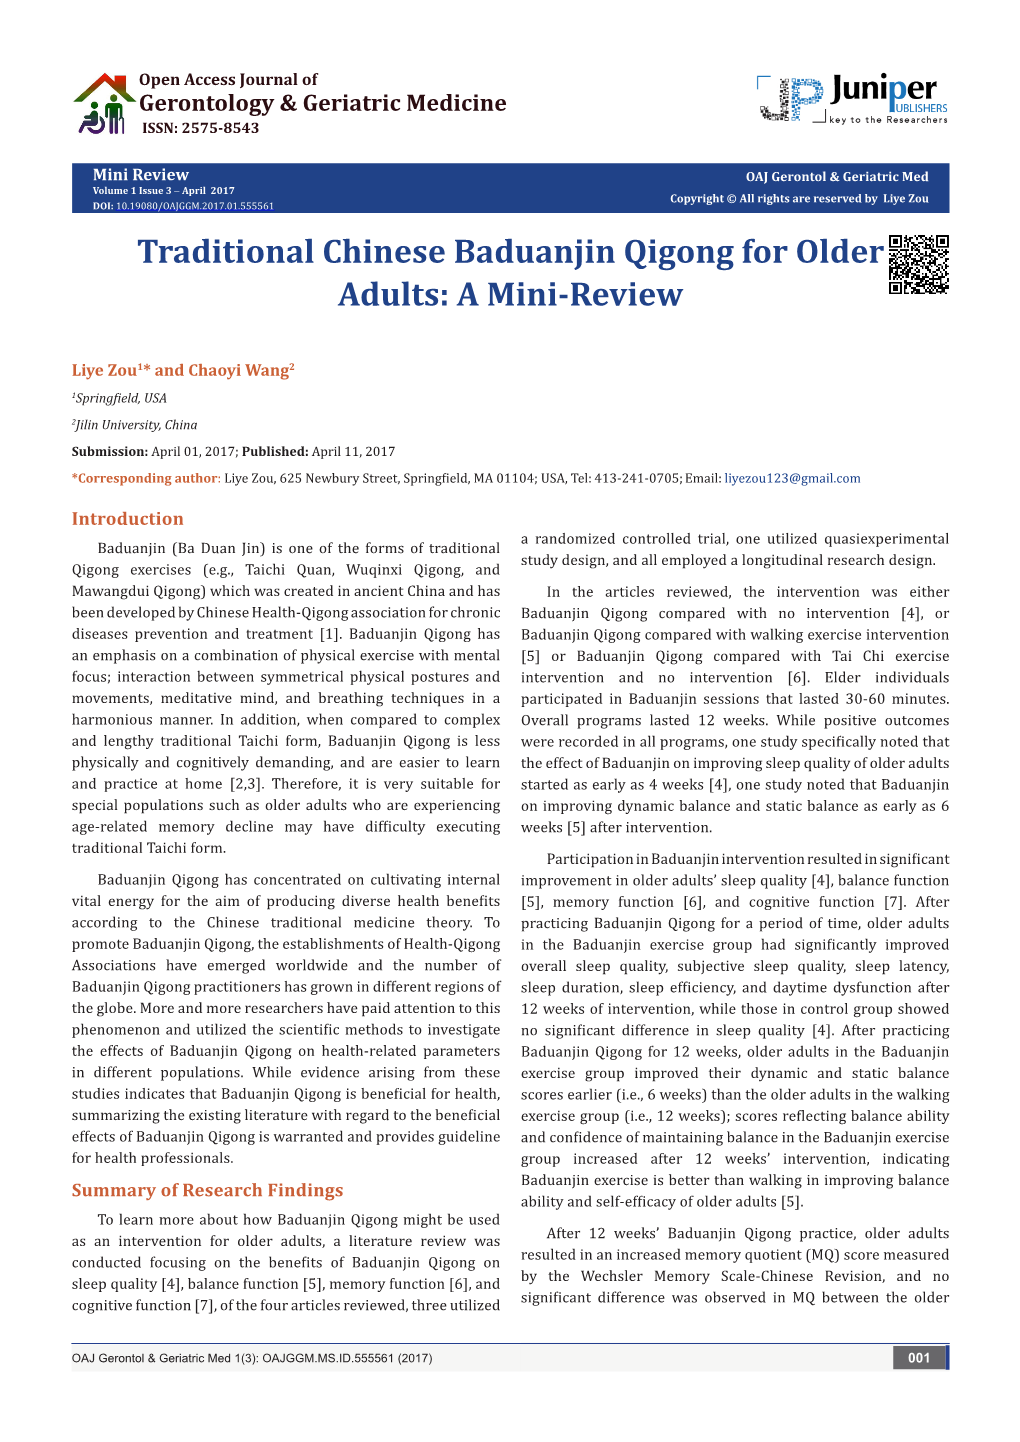 Traditional Chinese Baduanjin Qigong for Older Adults: a Mini-Review